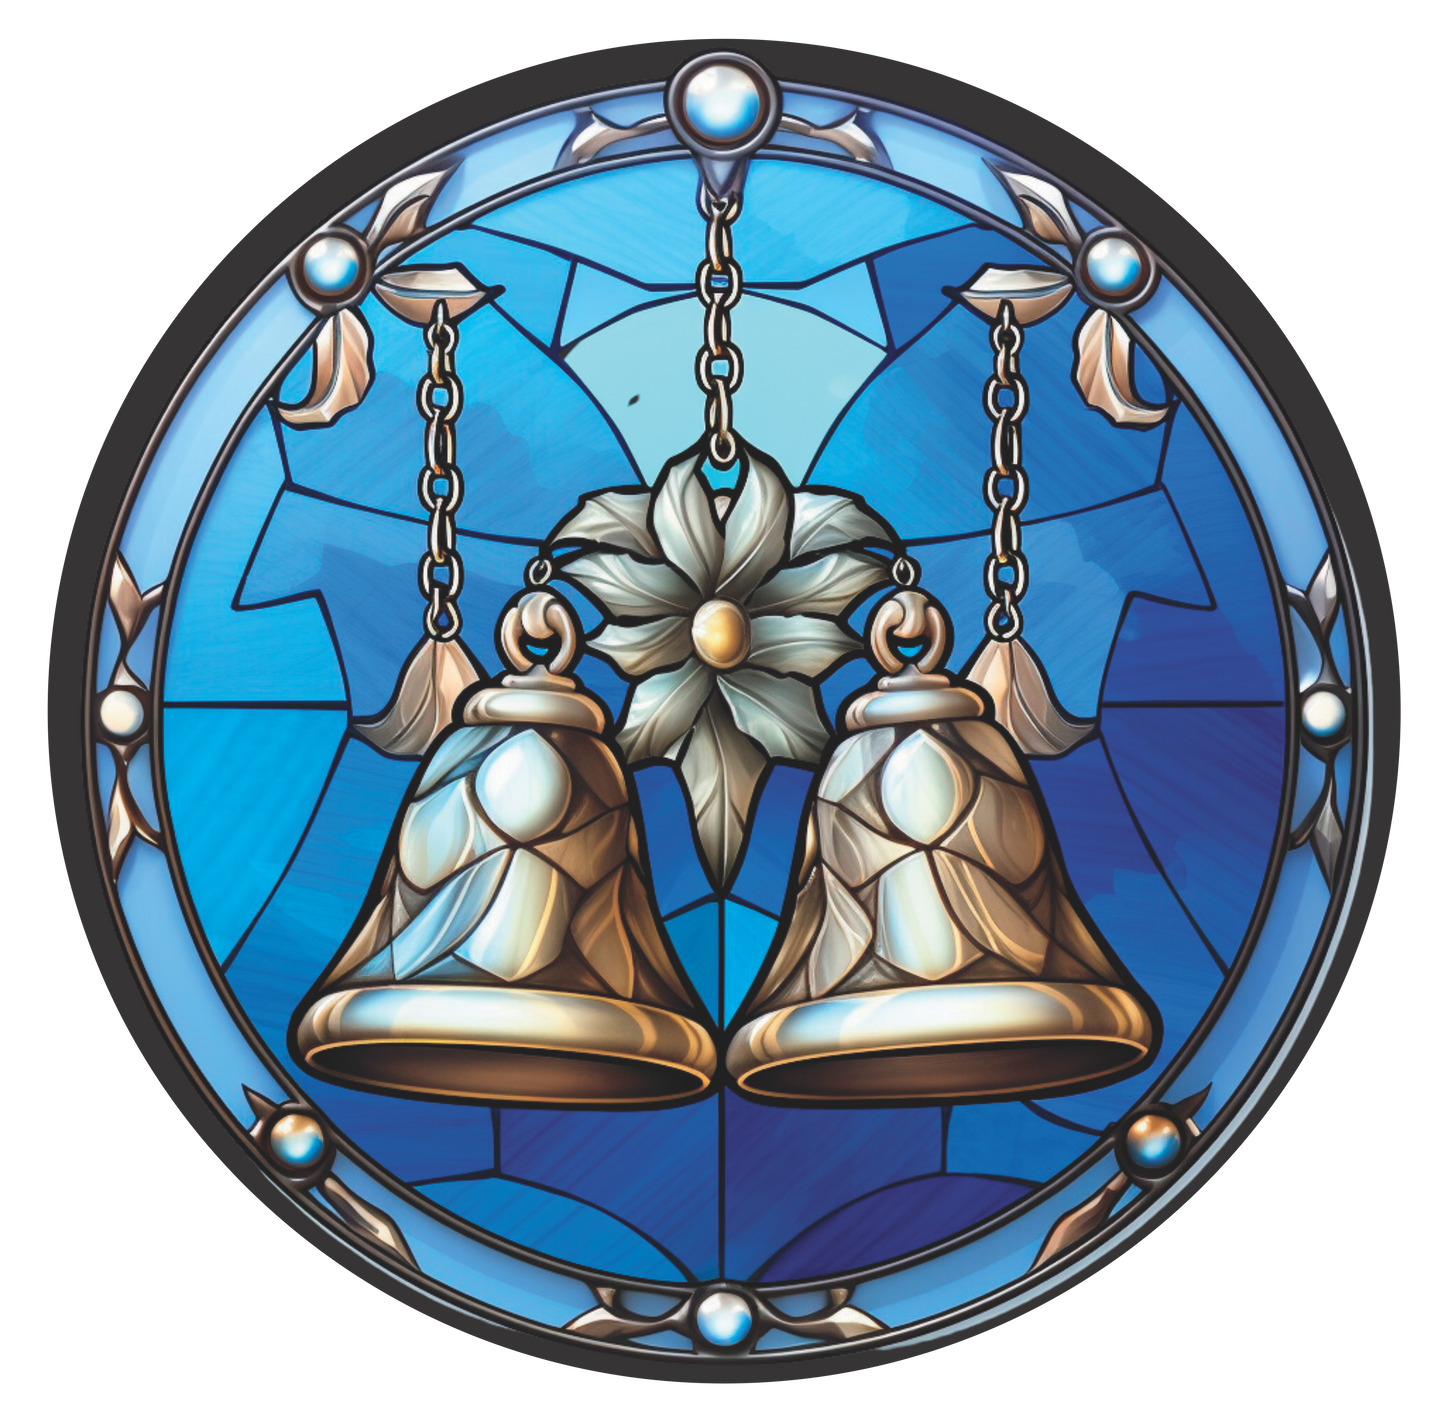 Copper and Silver Christmas Bells in Blue Stained Glass Round Sign